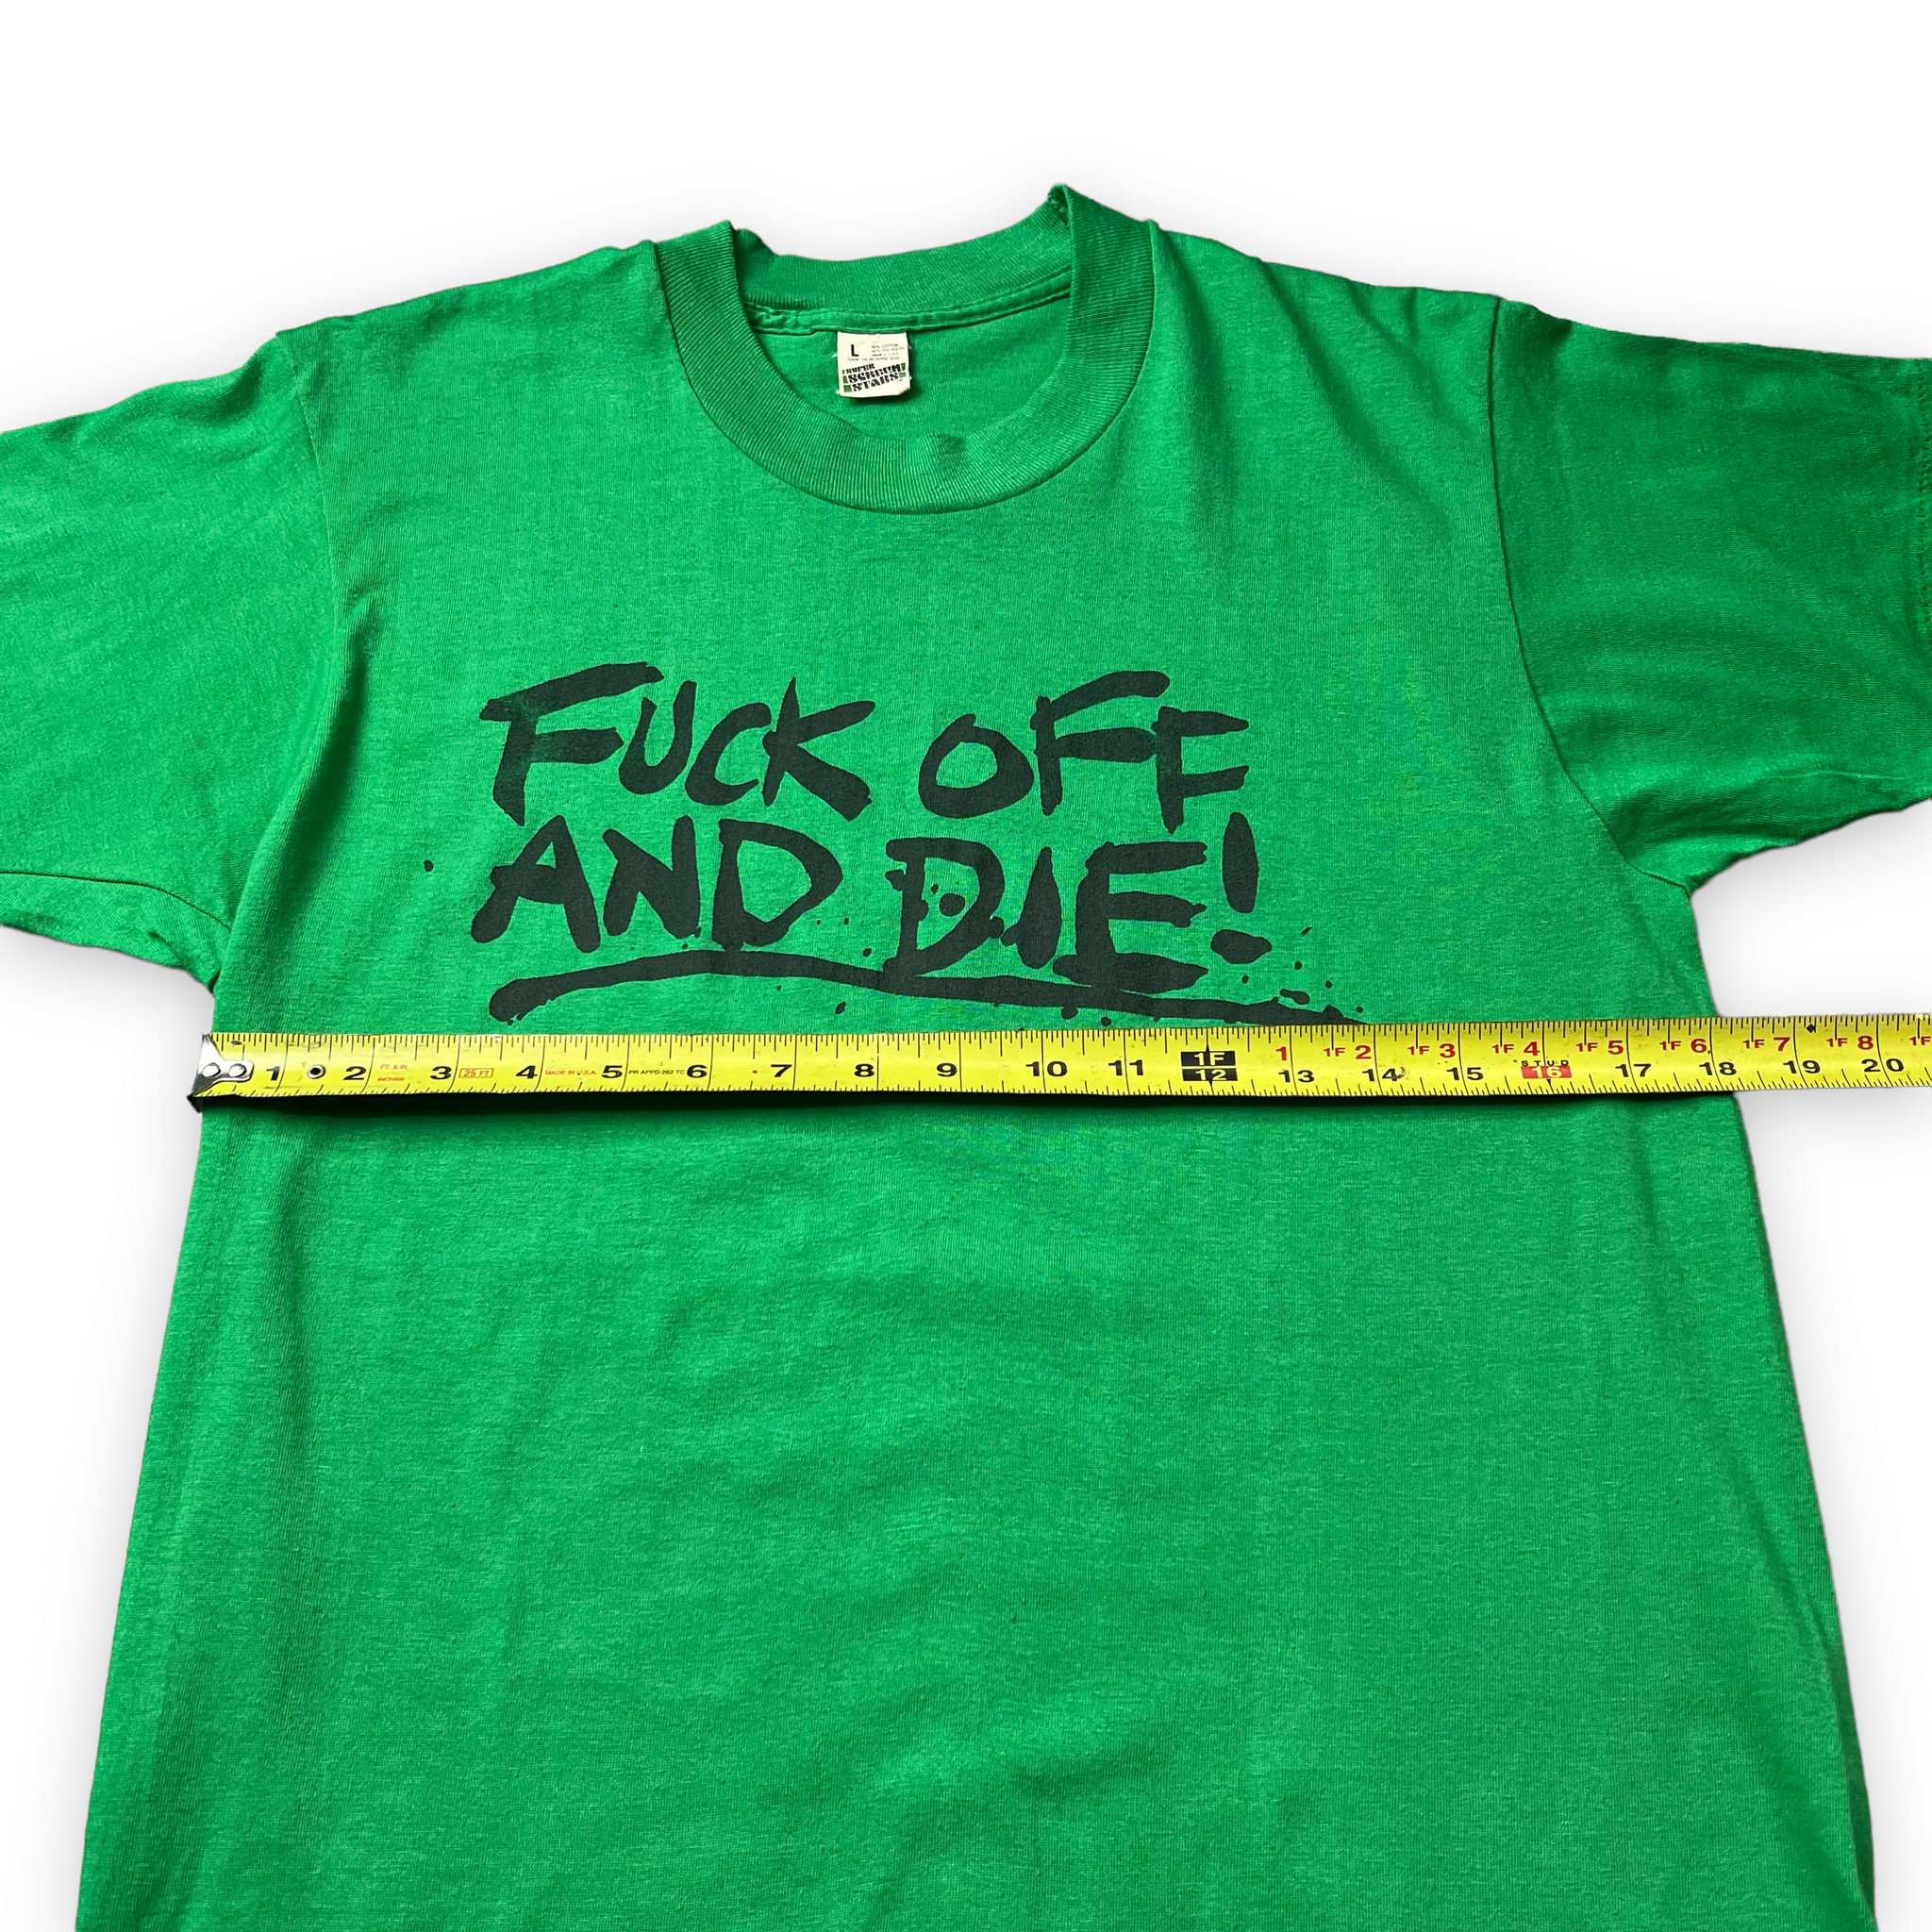 70’s/80’s Fuck off and die t shirt S\M